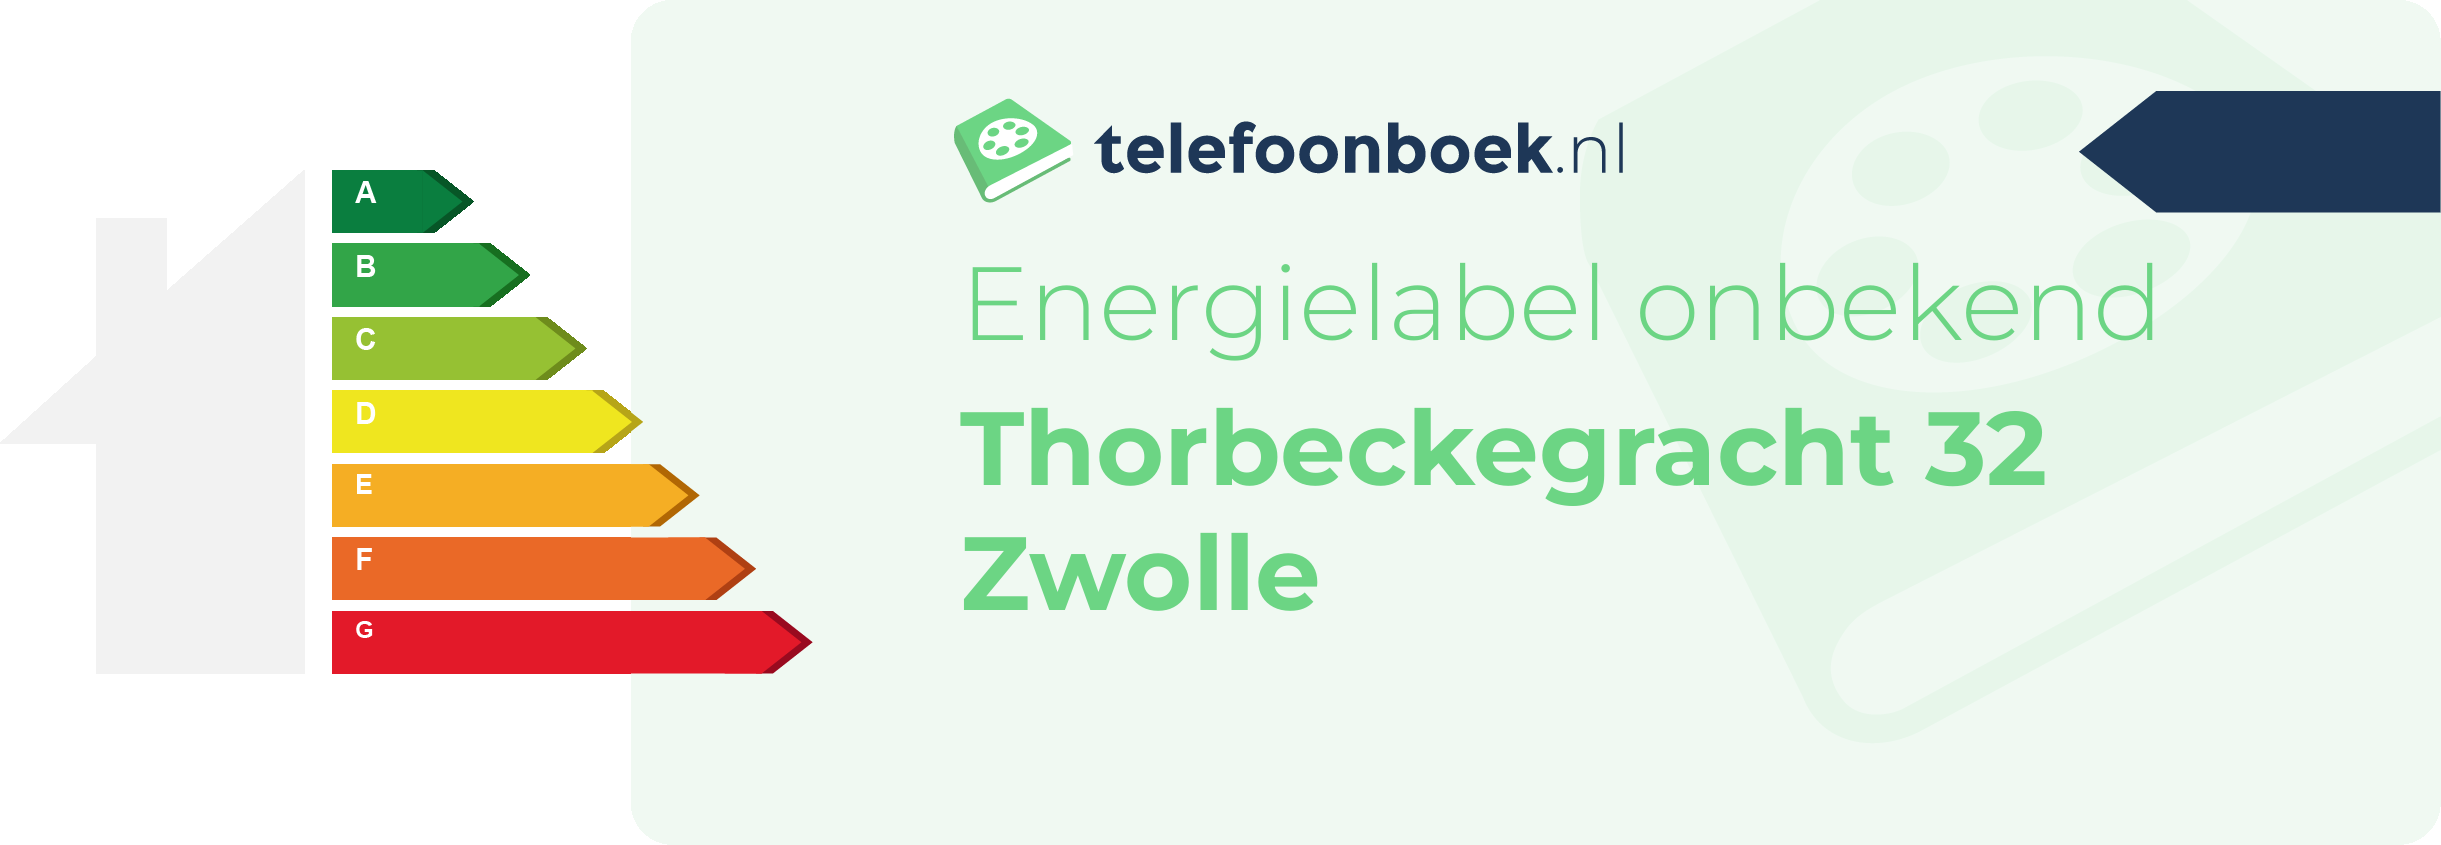 Energielabel Thorbeckegracht 32 Zwolle